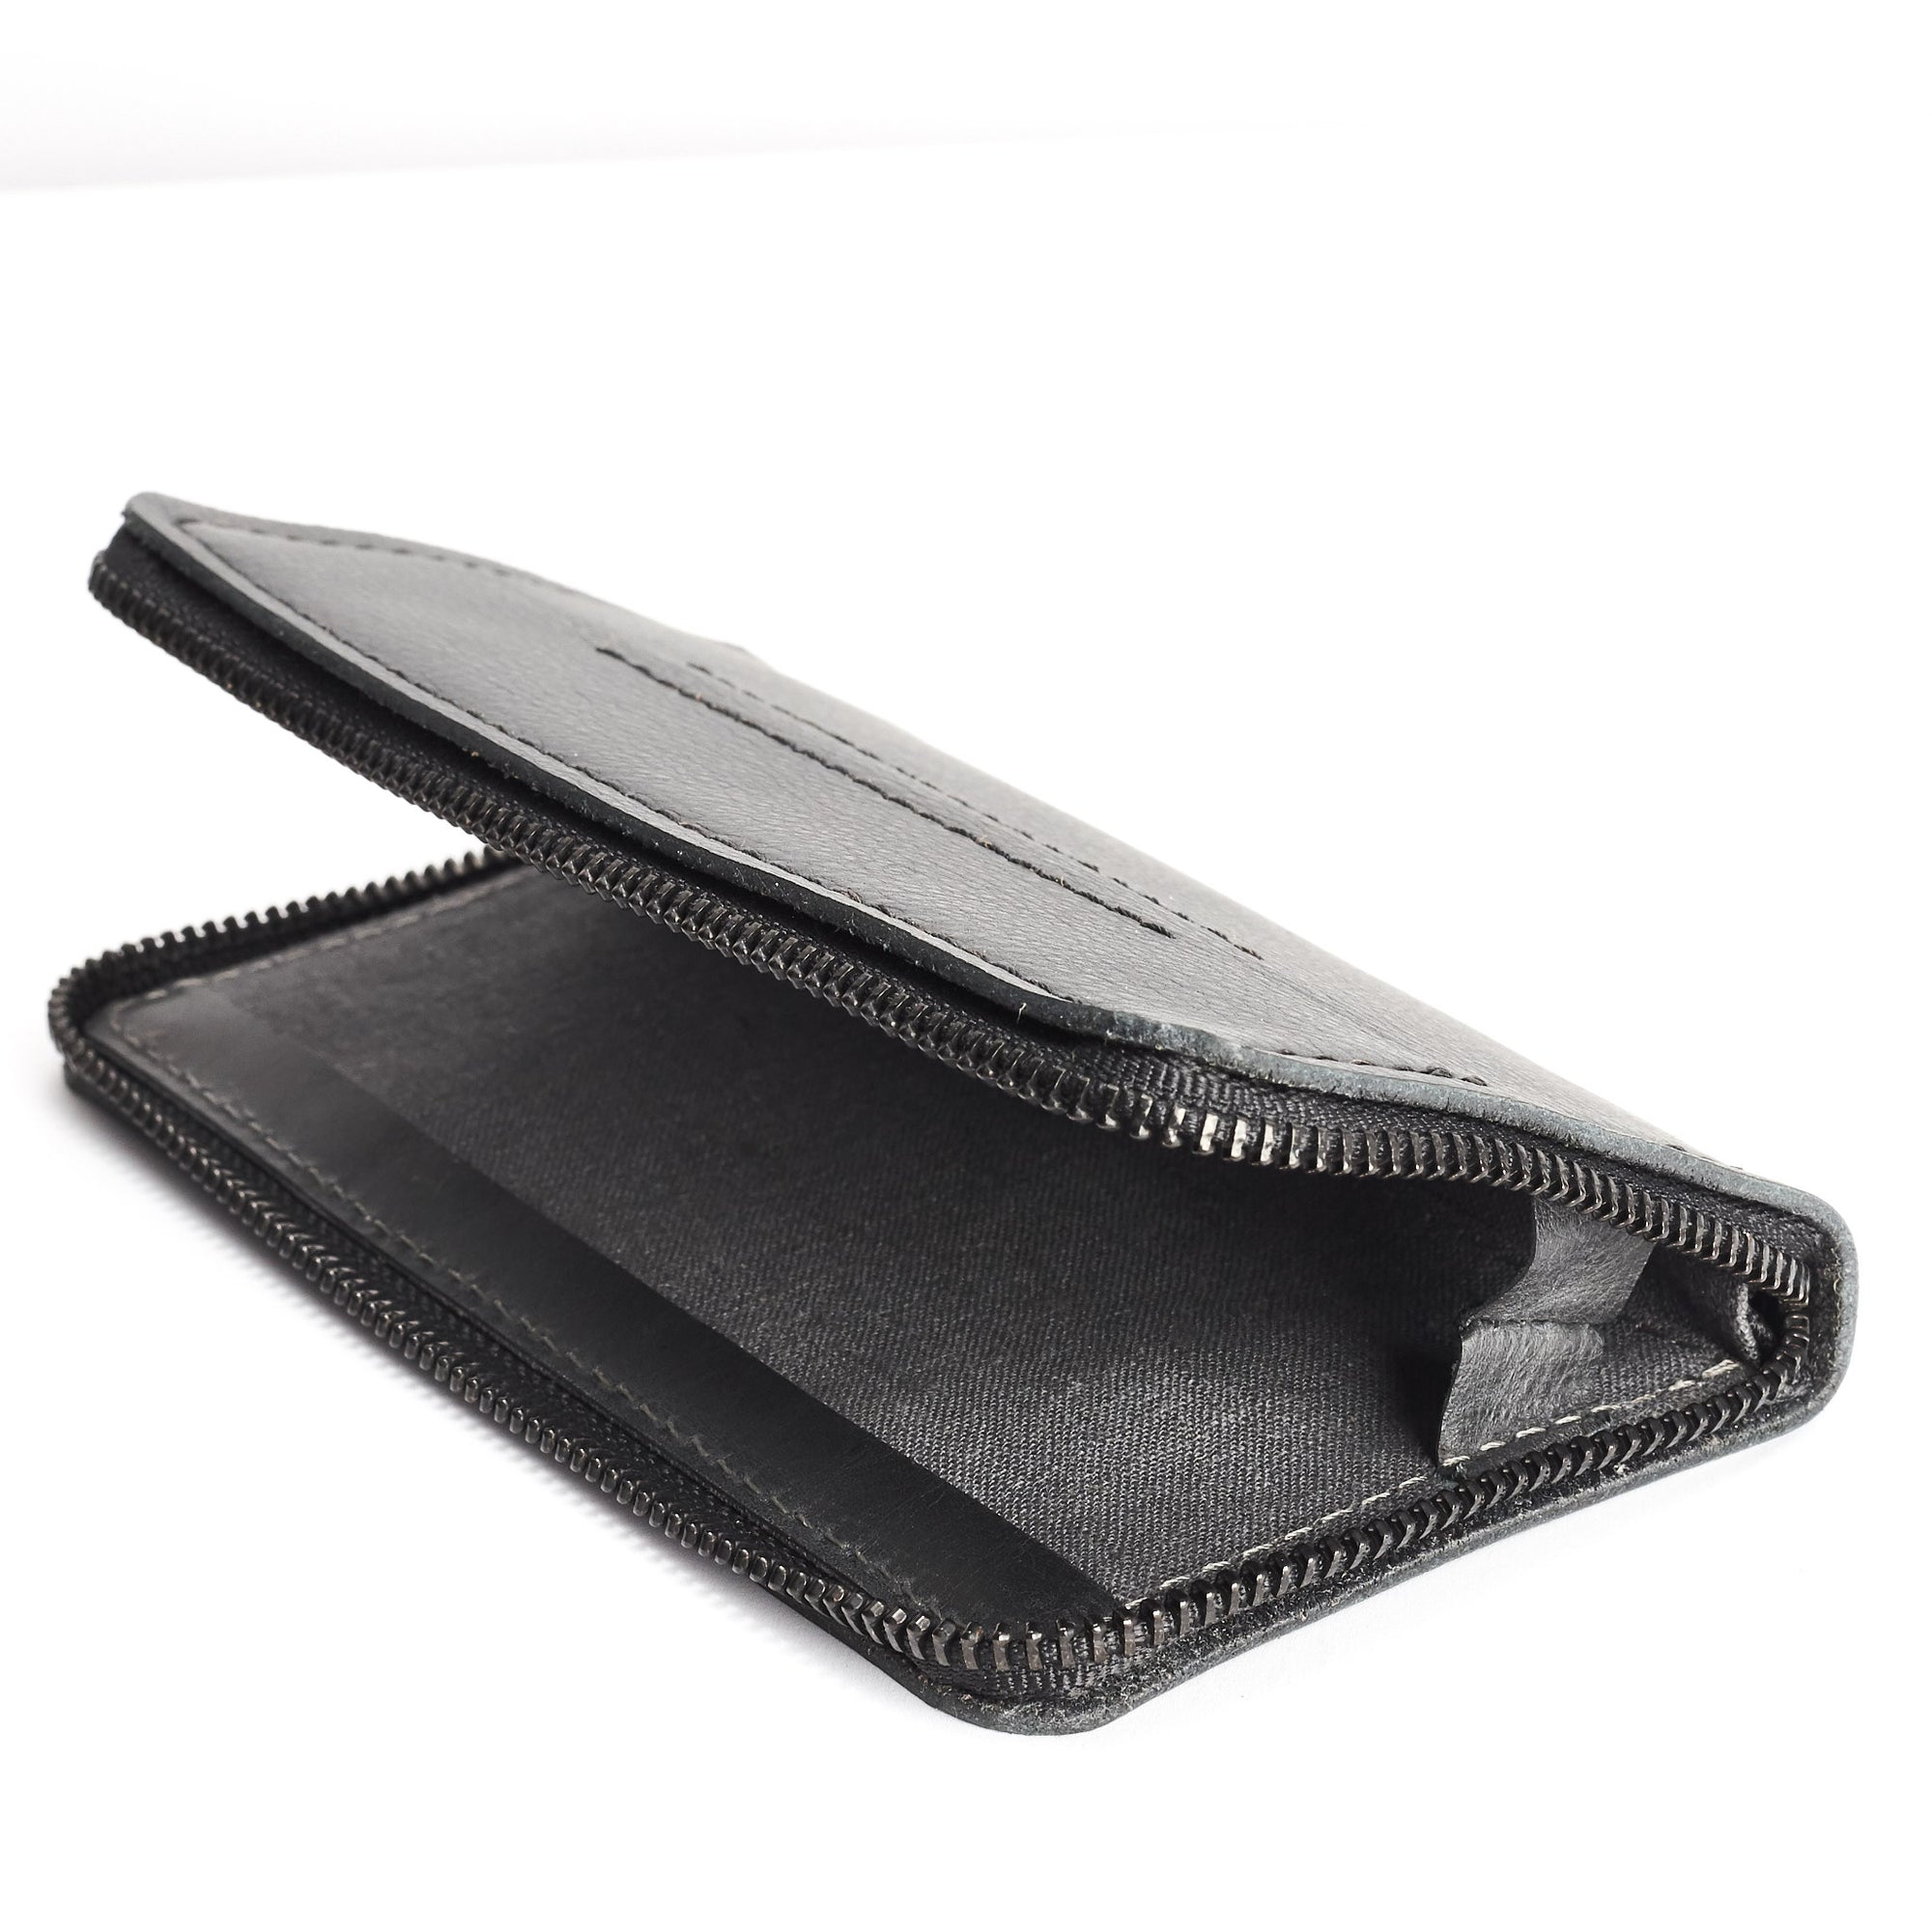 Linen interior. Black Leather case wallet stand for men. iPhone x, iPhone 10, iPhone 8 plus leather stand sleeve